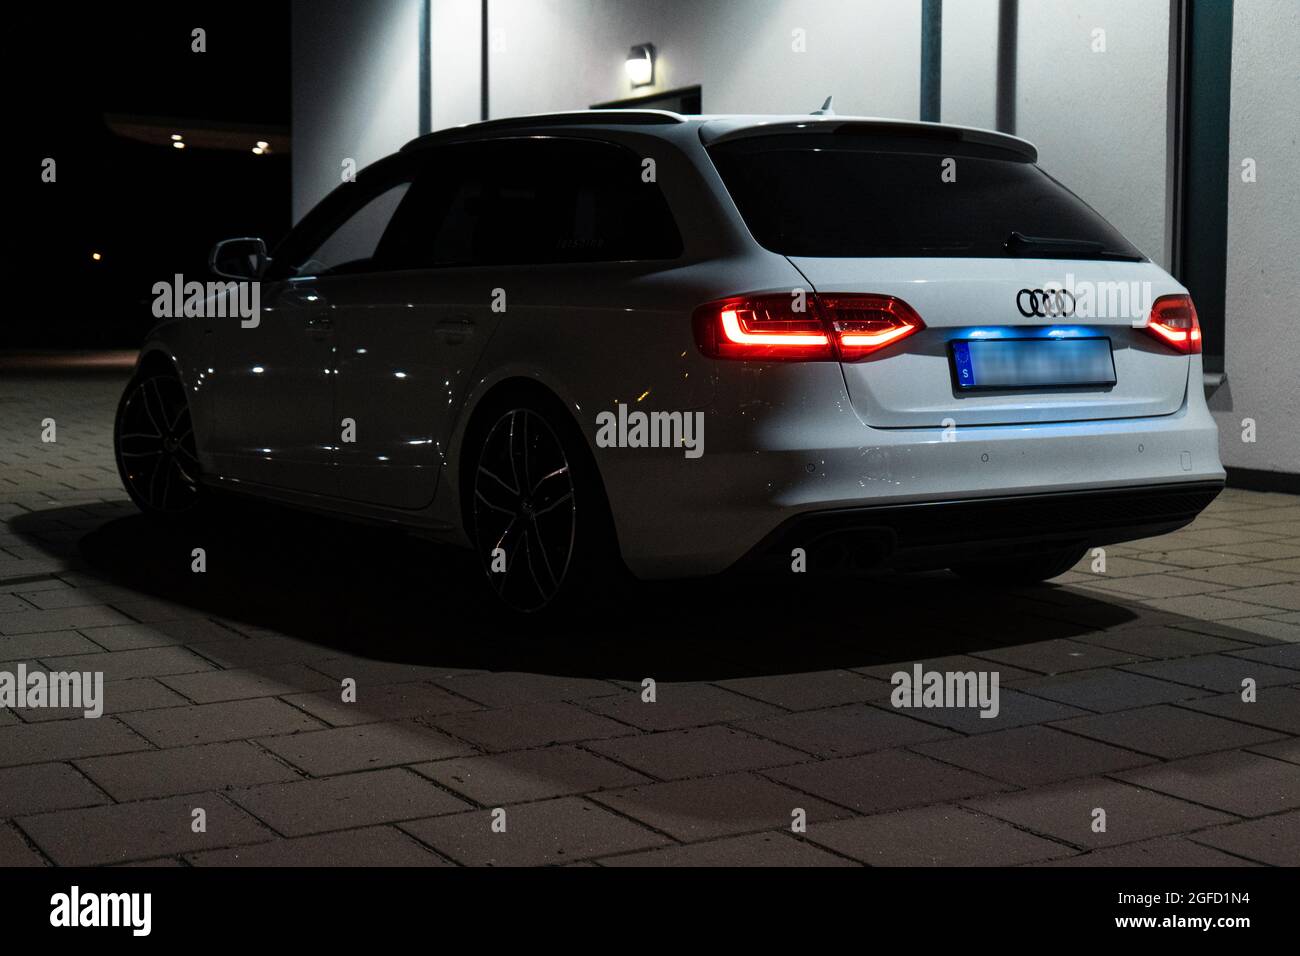 ULRICEHAMN, SWEDEN - Aug 04, 2021: The back part of white Audi A4 Avant with lit taillights outdoors at night Stock Photo